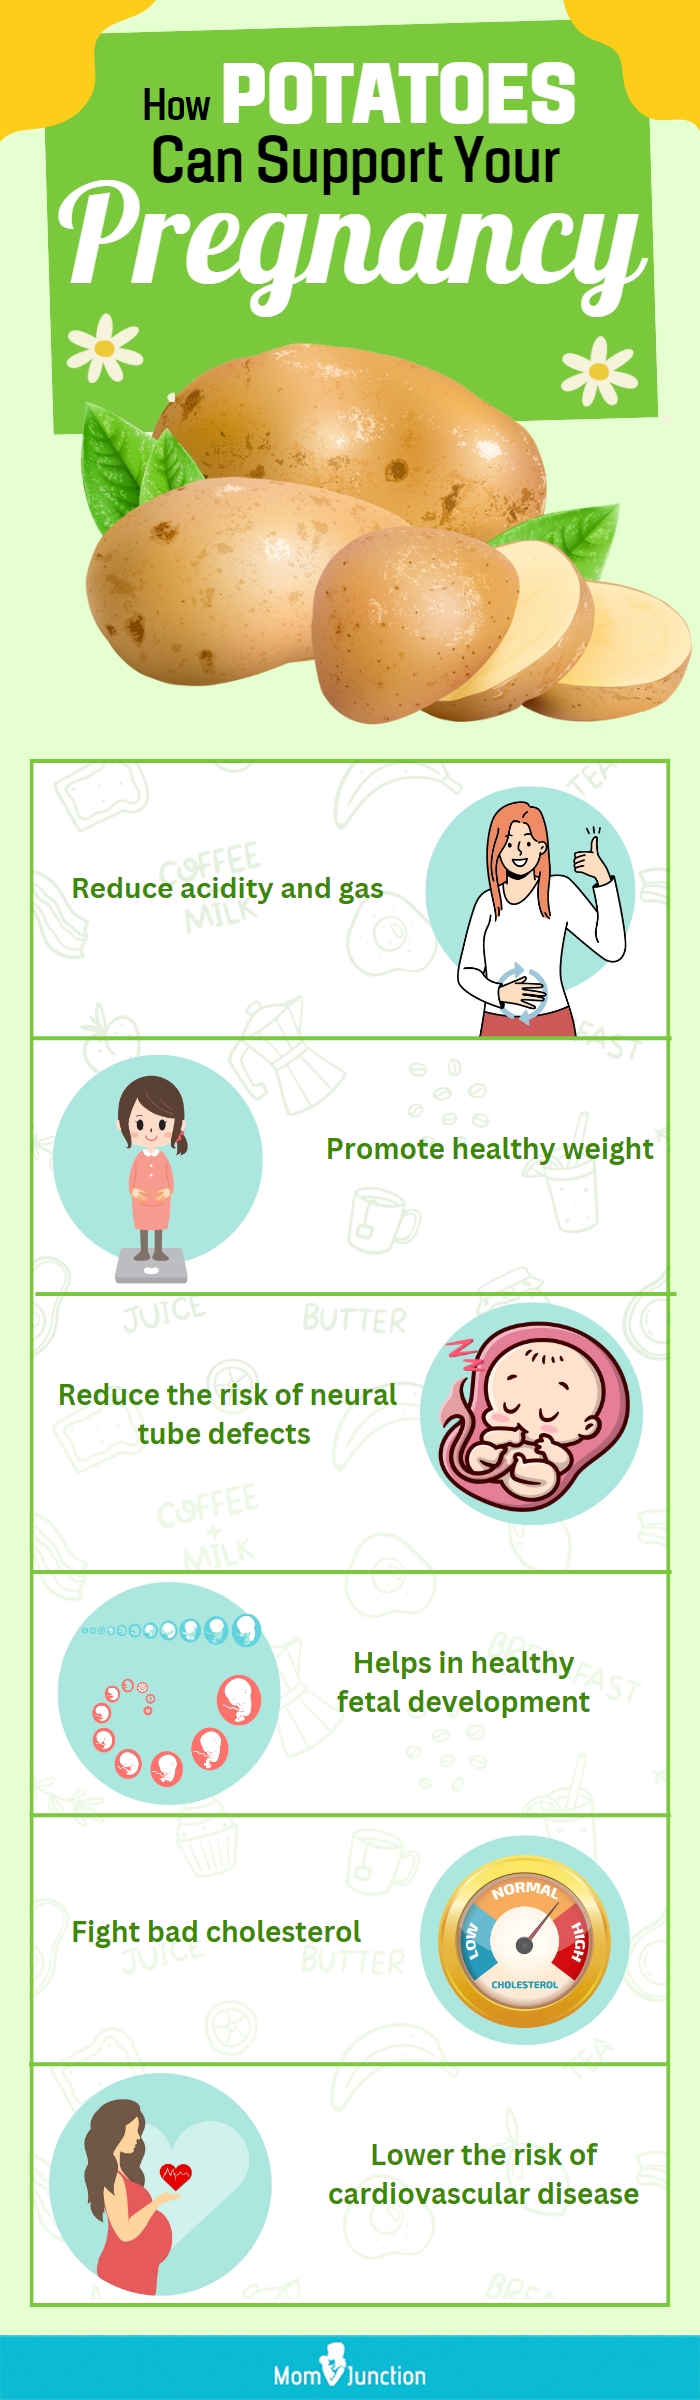 how potatoes can support your pregnancy (infographic)